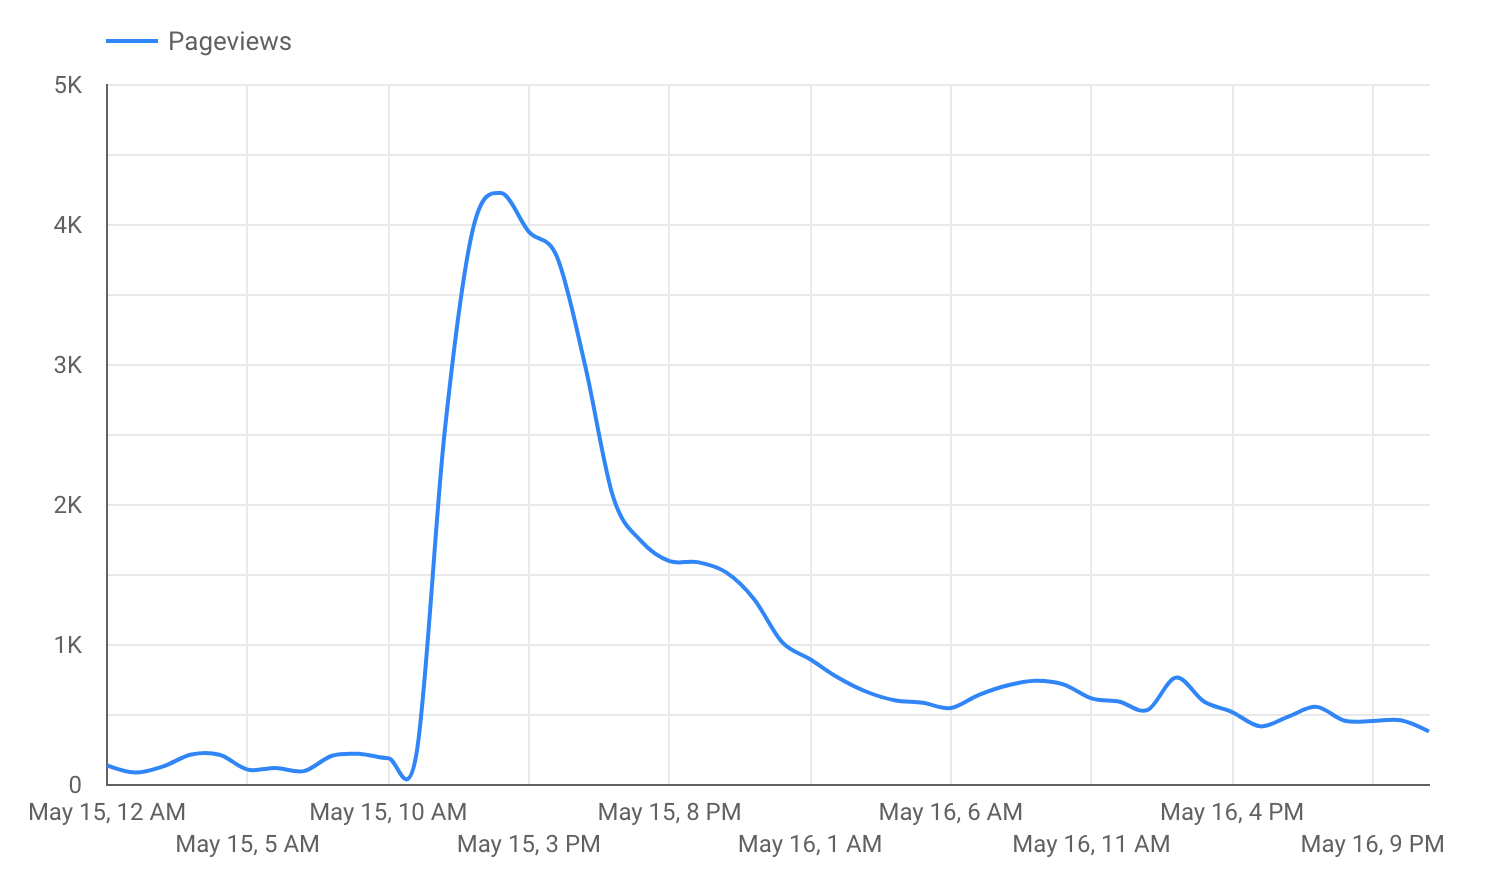 Pageviews per hour on May 15th and 16th, 2019